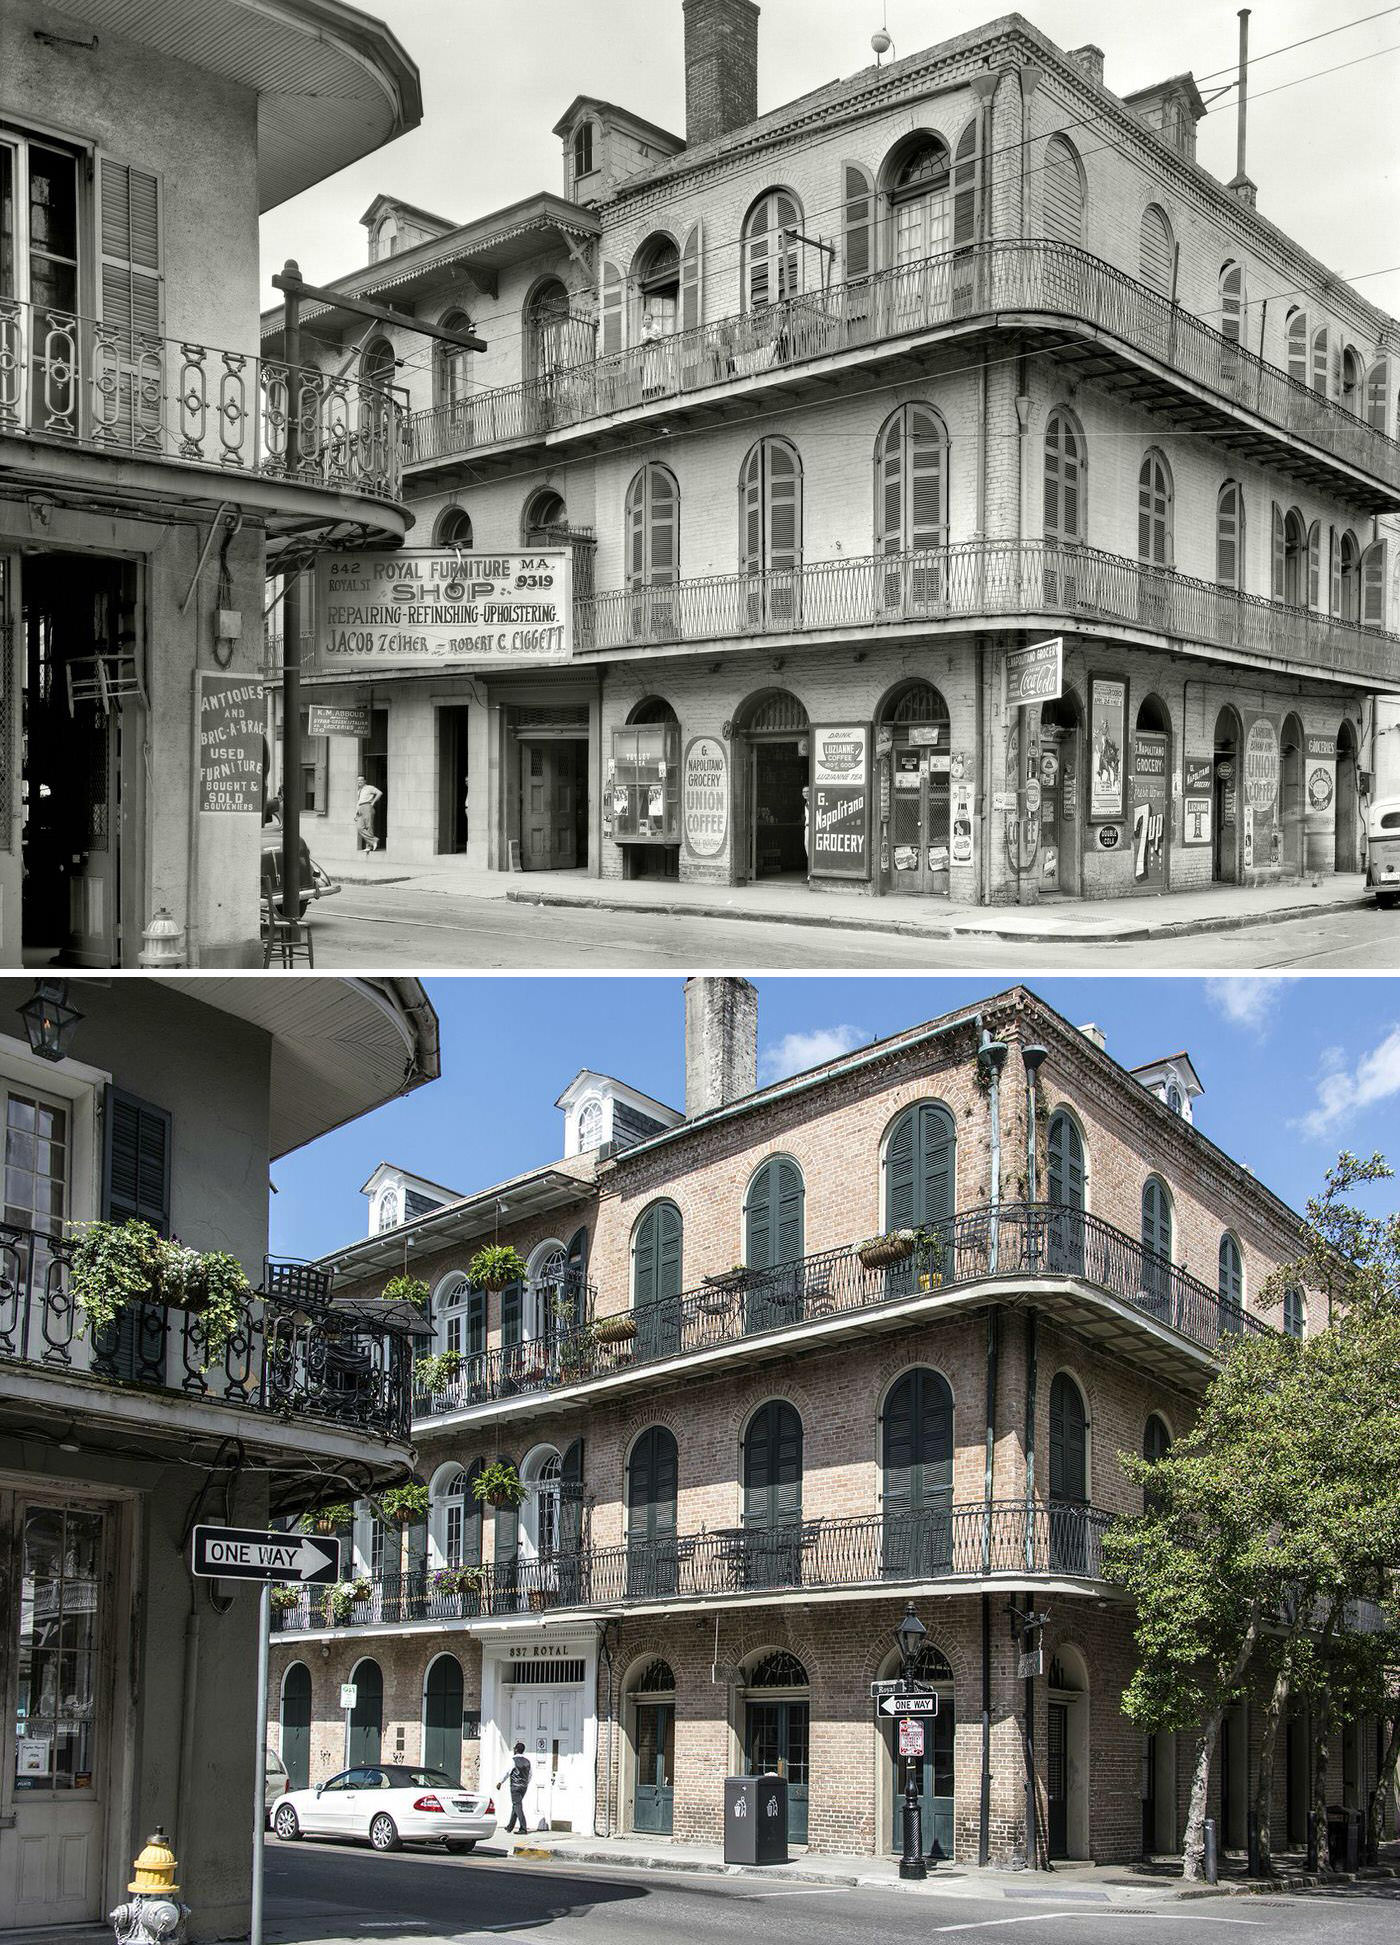 Royal and Dumaine, 1937 VS Royal and Dumaine, 2015